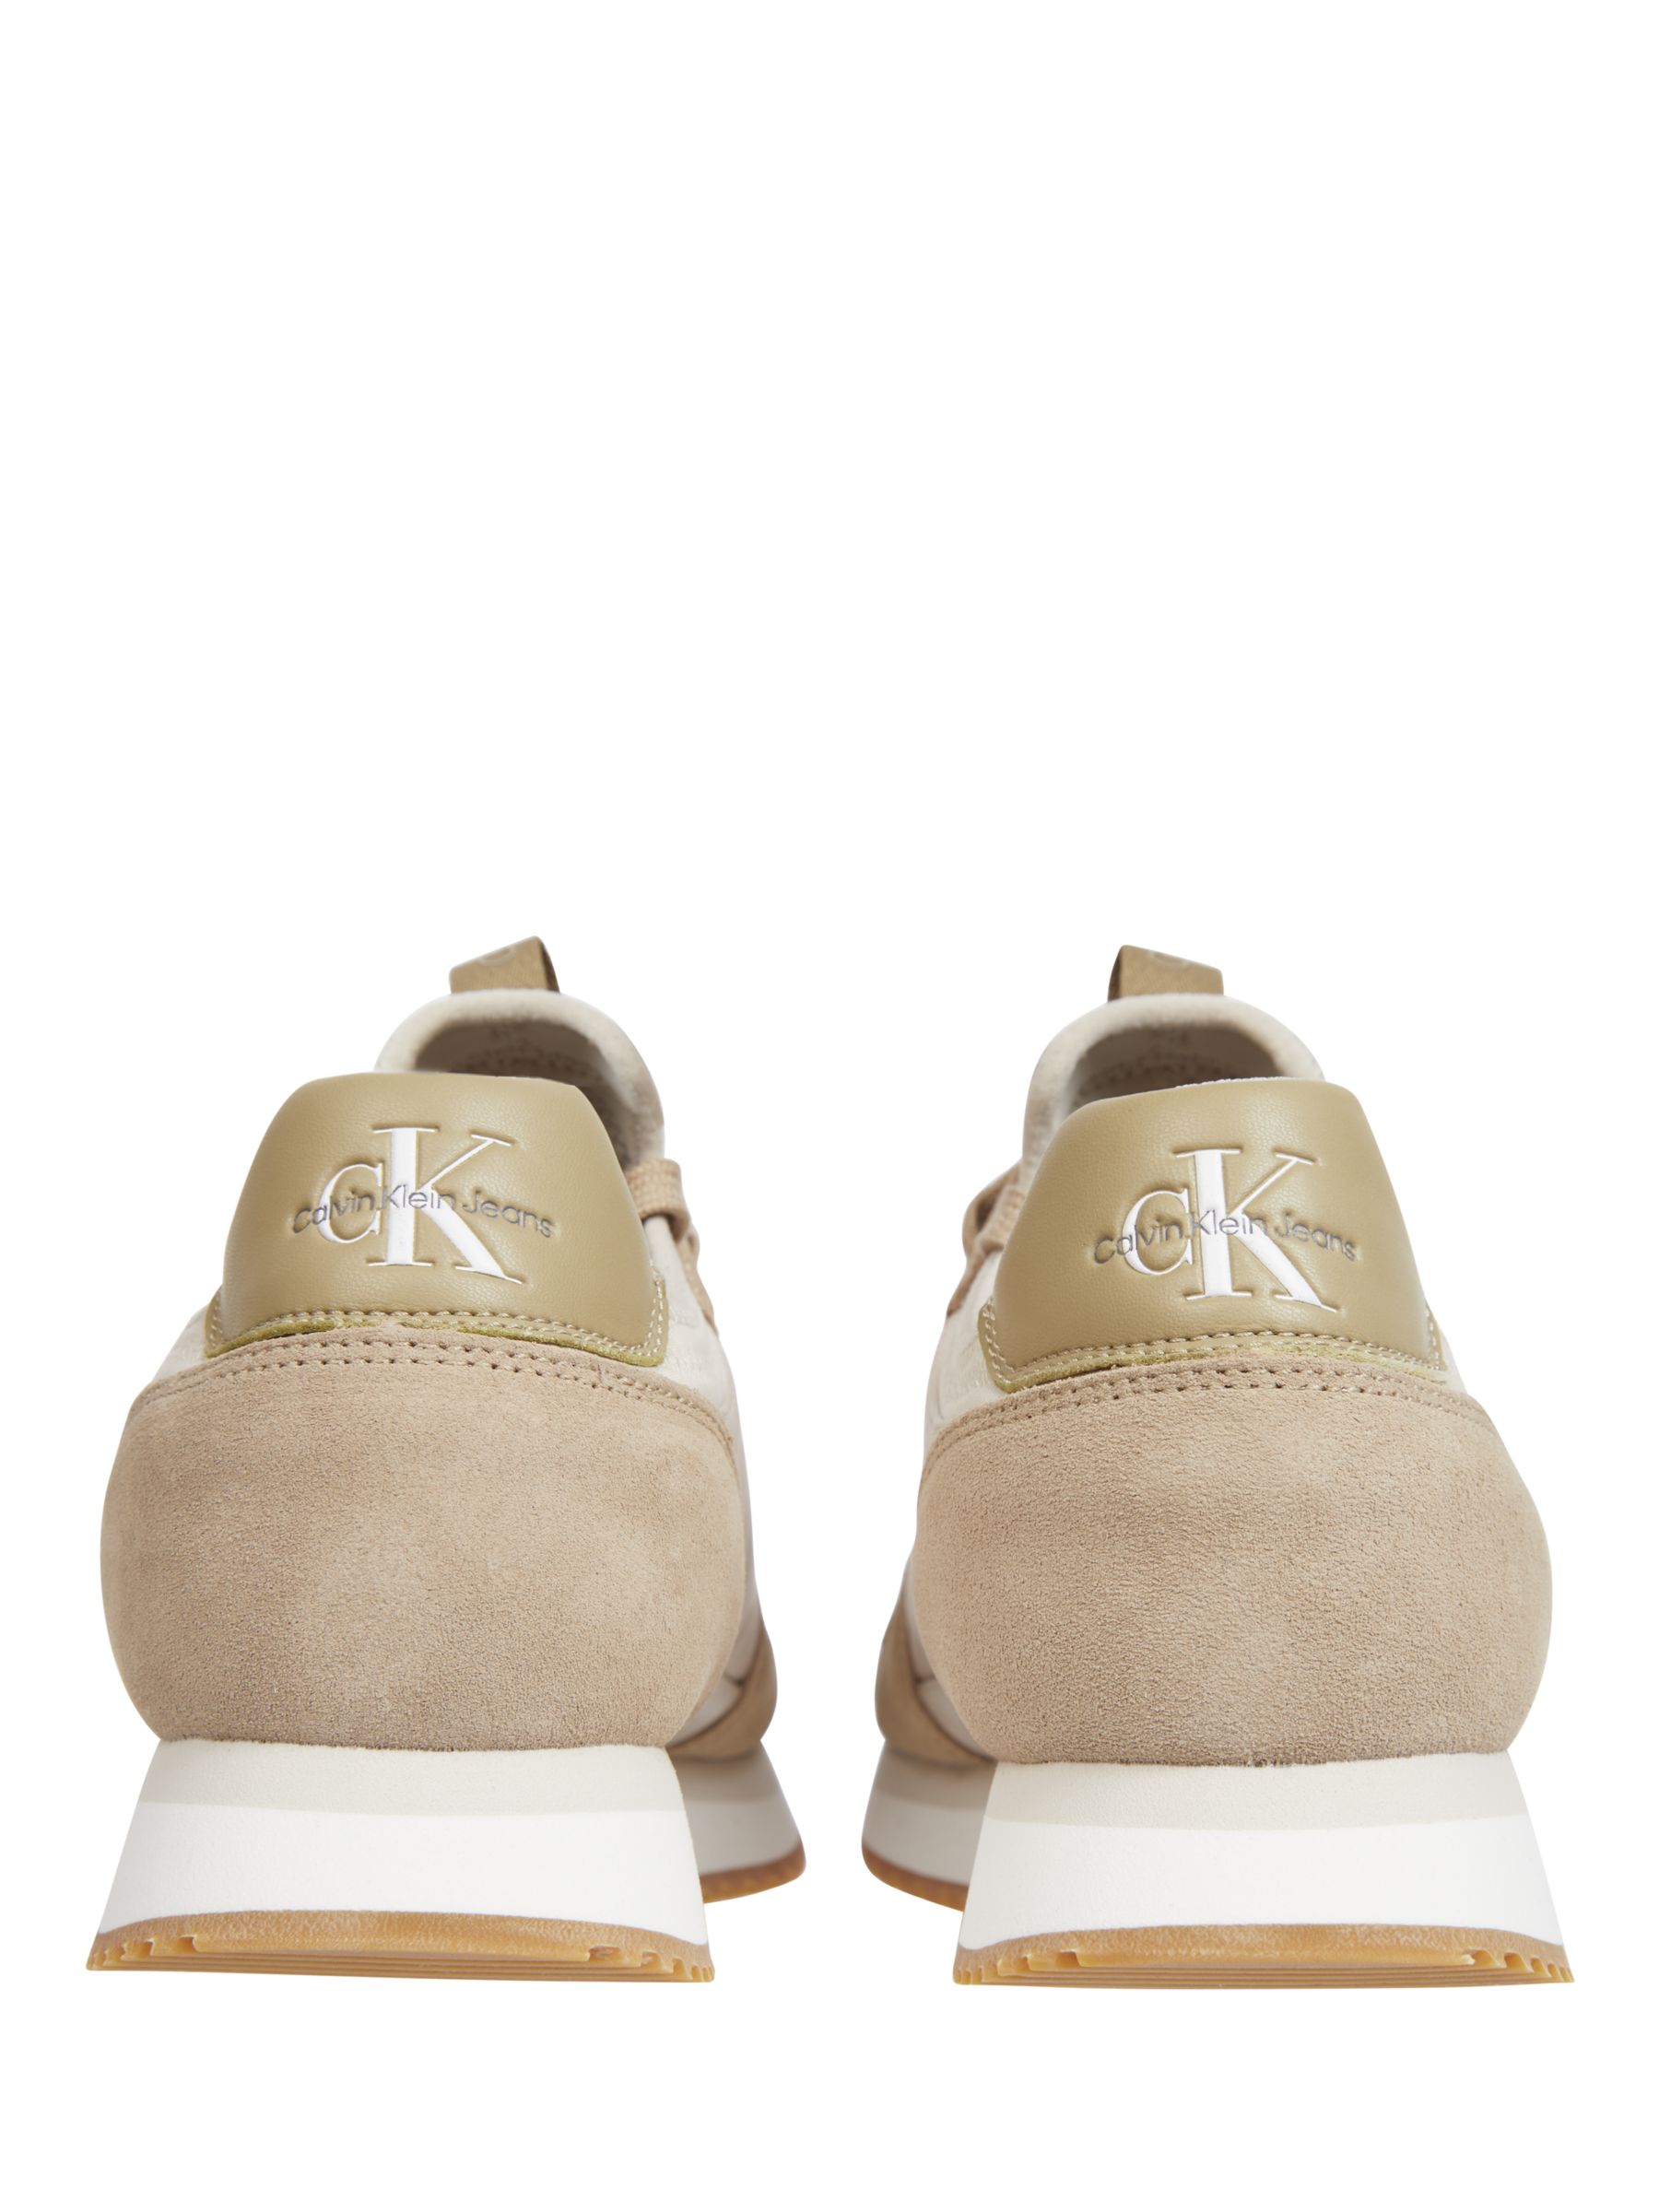 Buy Calvin Klein Suede Lace Up Runner Trainers, Eggshell/Travertine Online at johnlewis.com